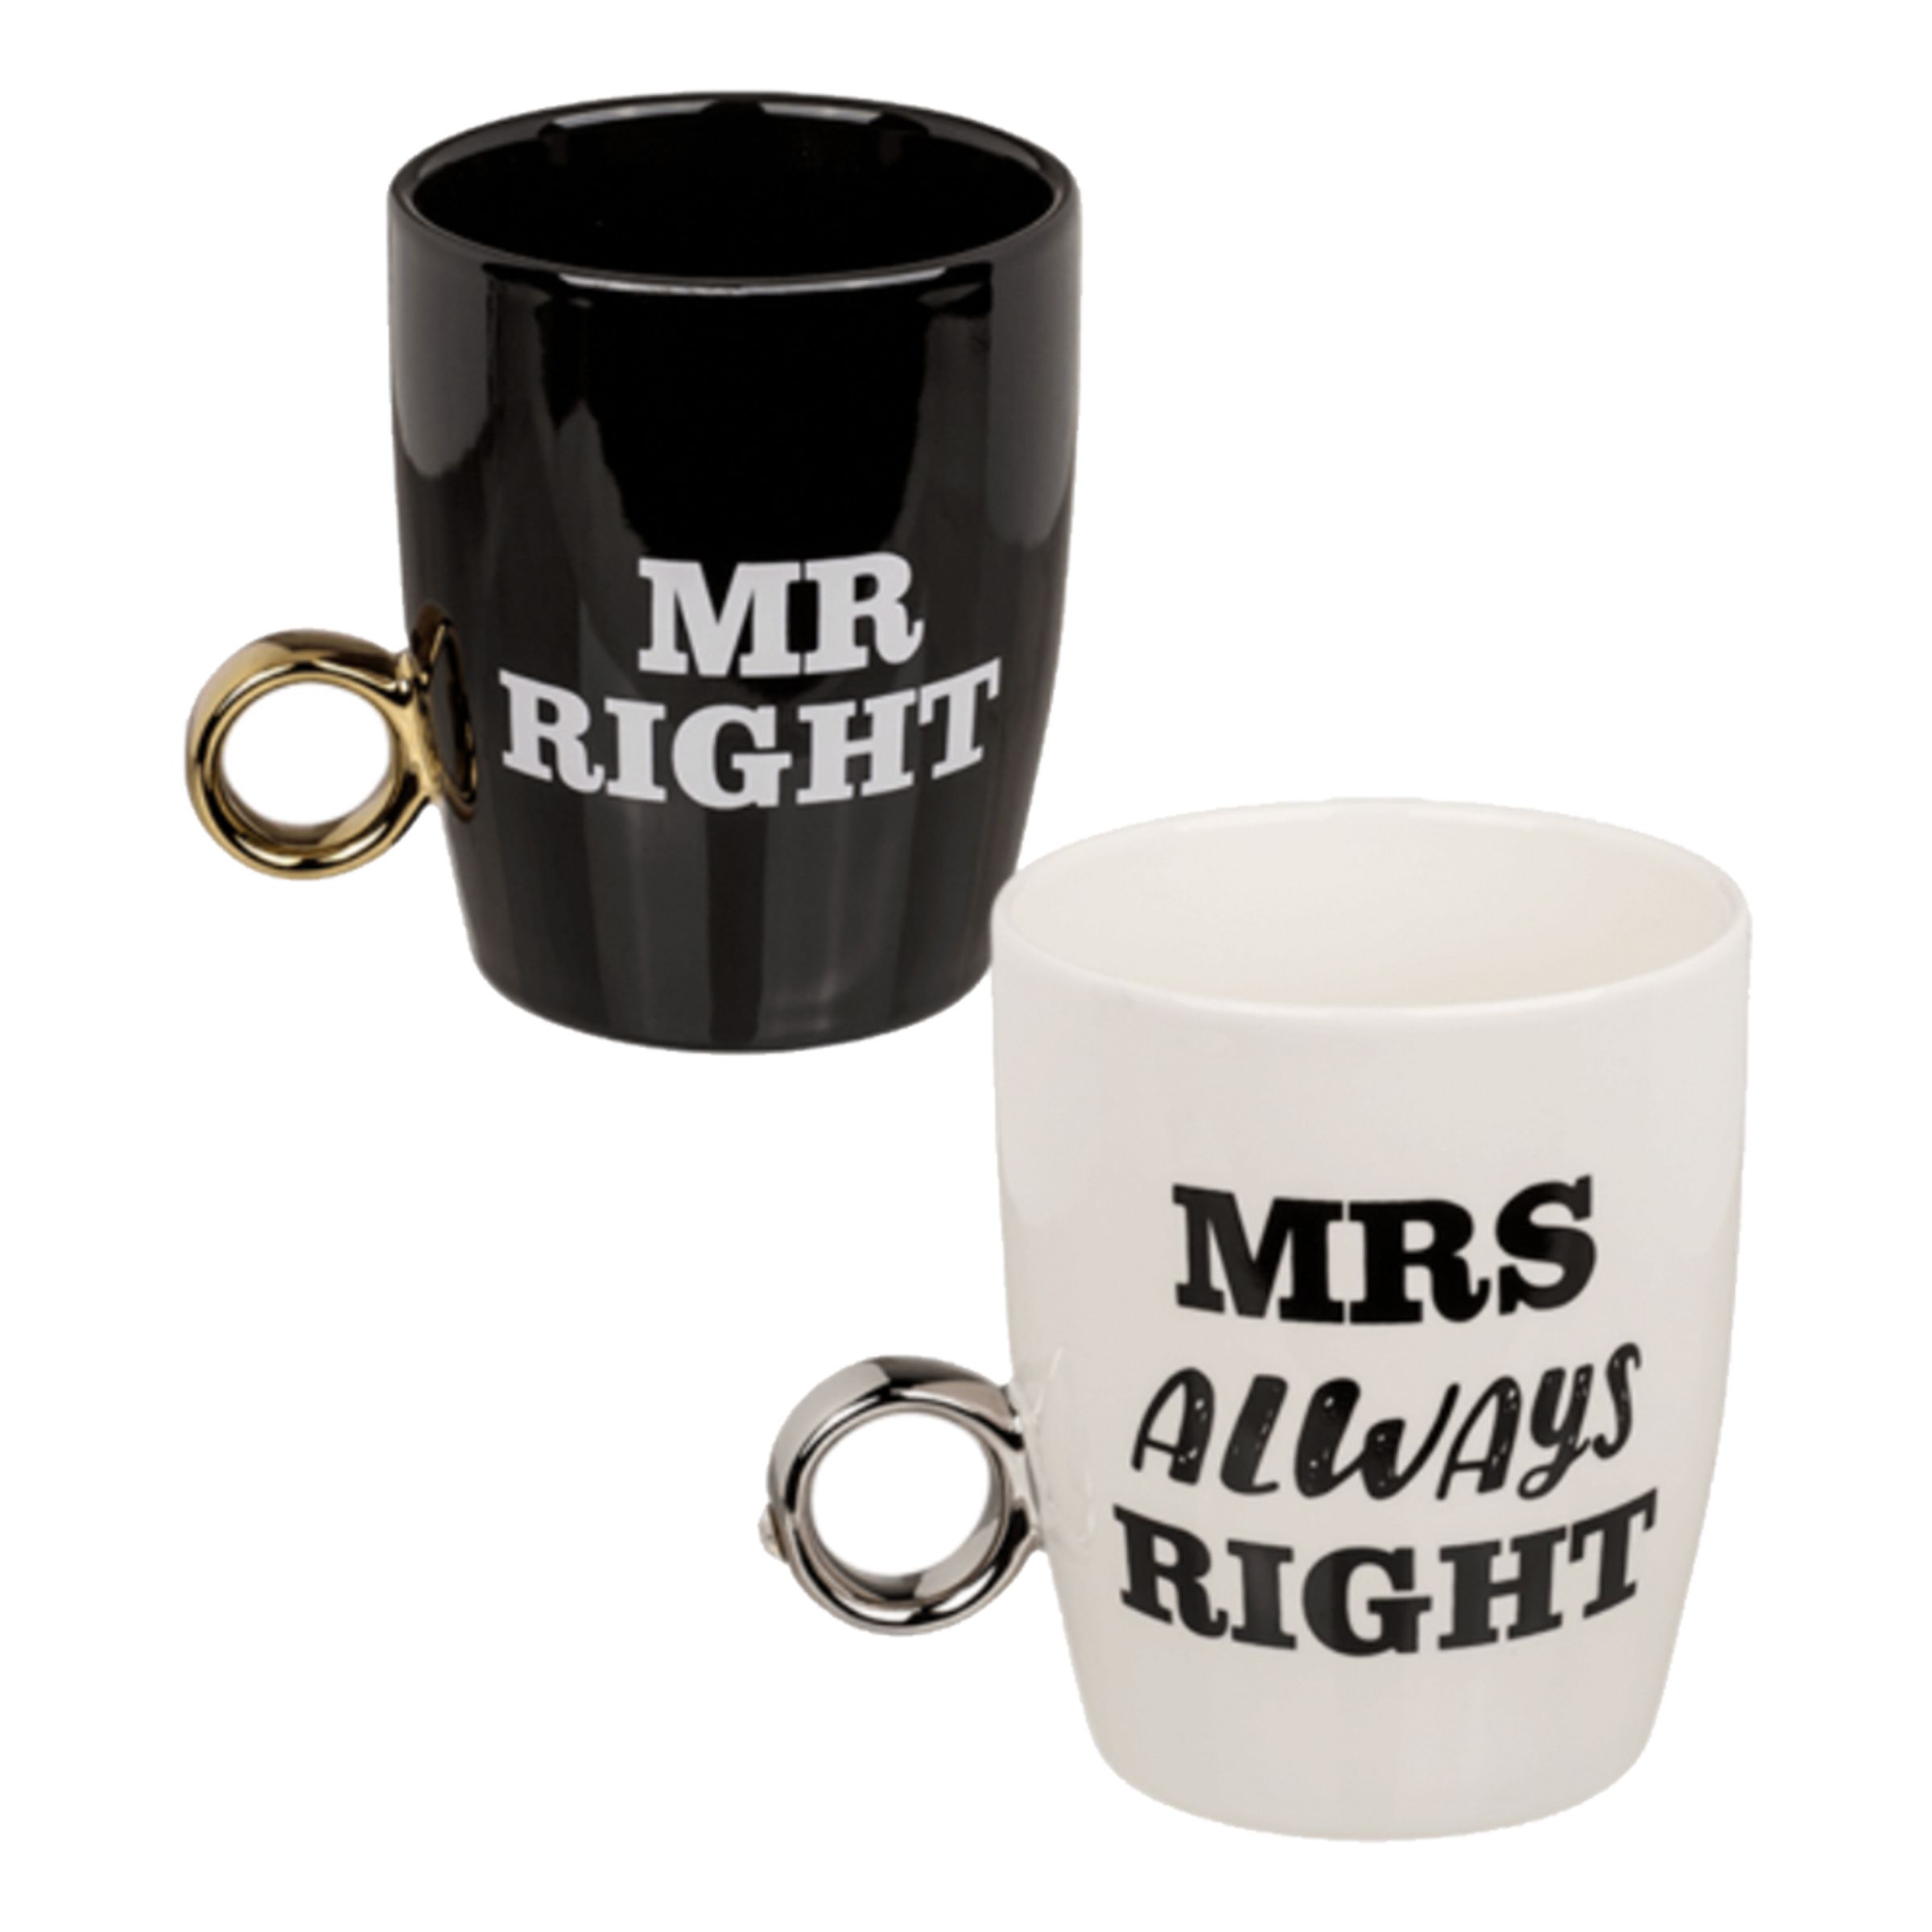 Mugg Mr Right & Mrs Always Right - 2-pack